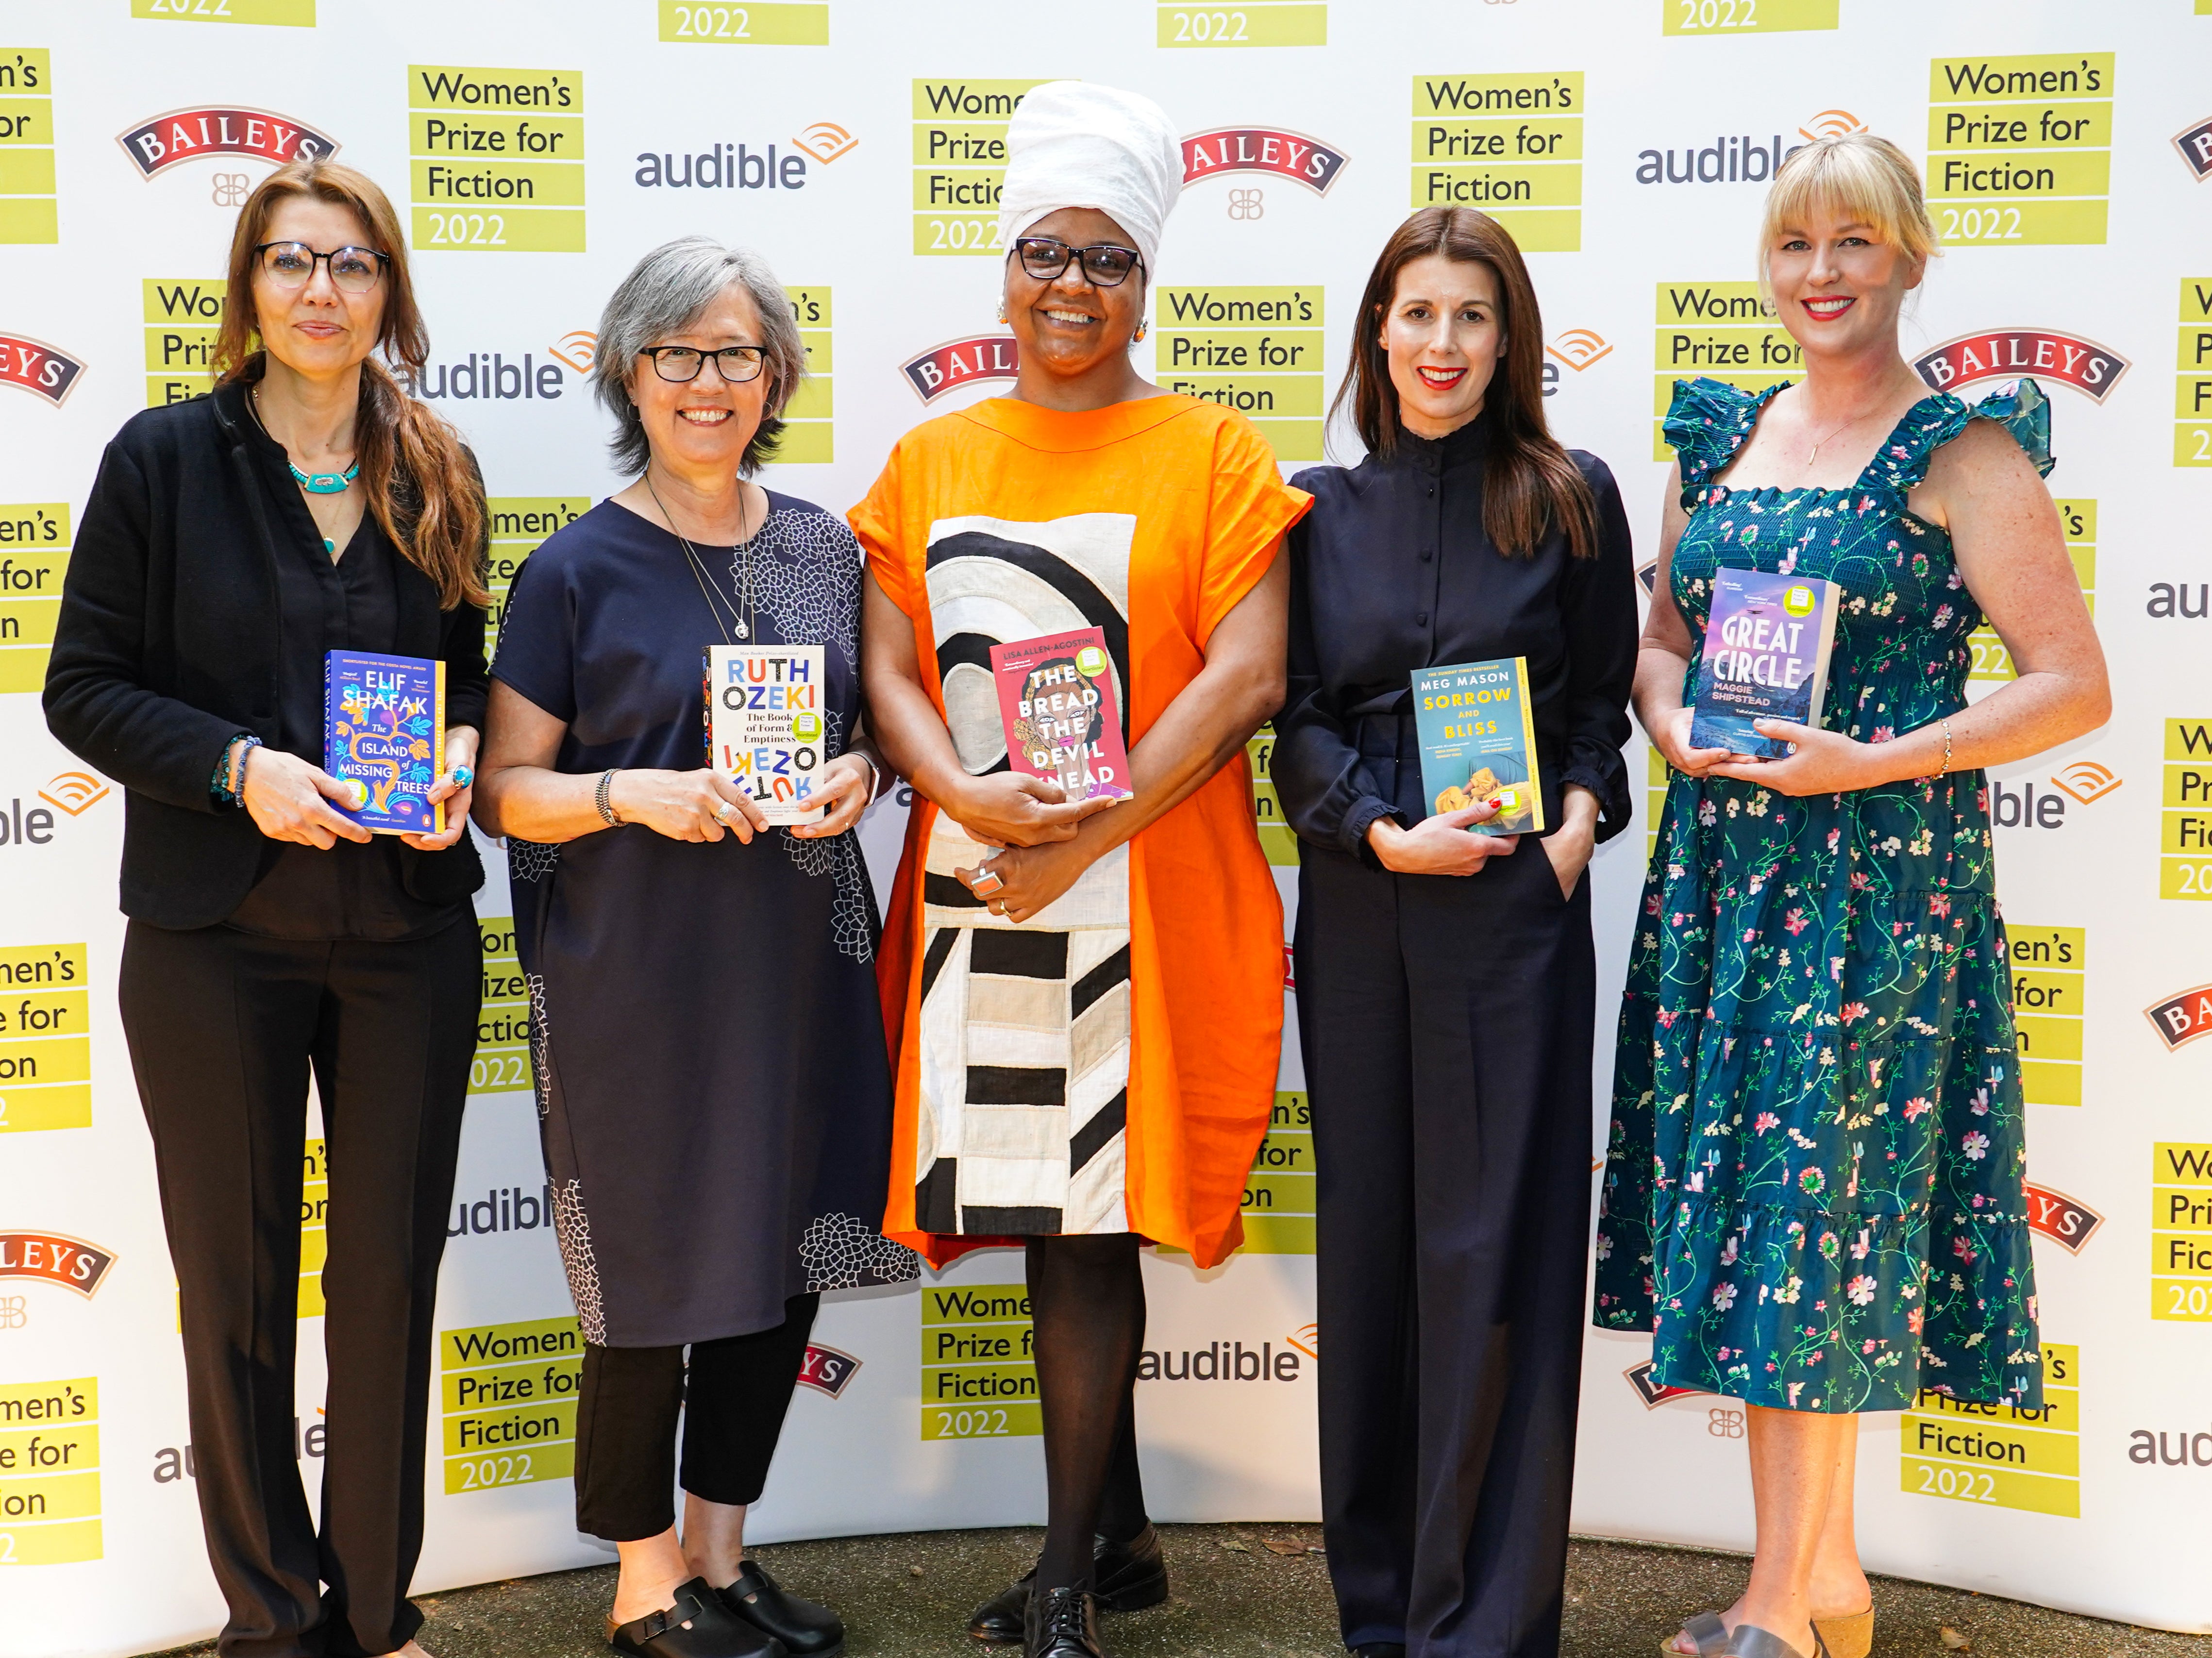 The authors shortlisted for Women’s Prize were Elif Shafak, Ozeki, Lisa Allen-Agostini, Meg Mason and Maggie Shipstead (left to right)